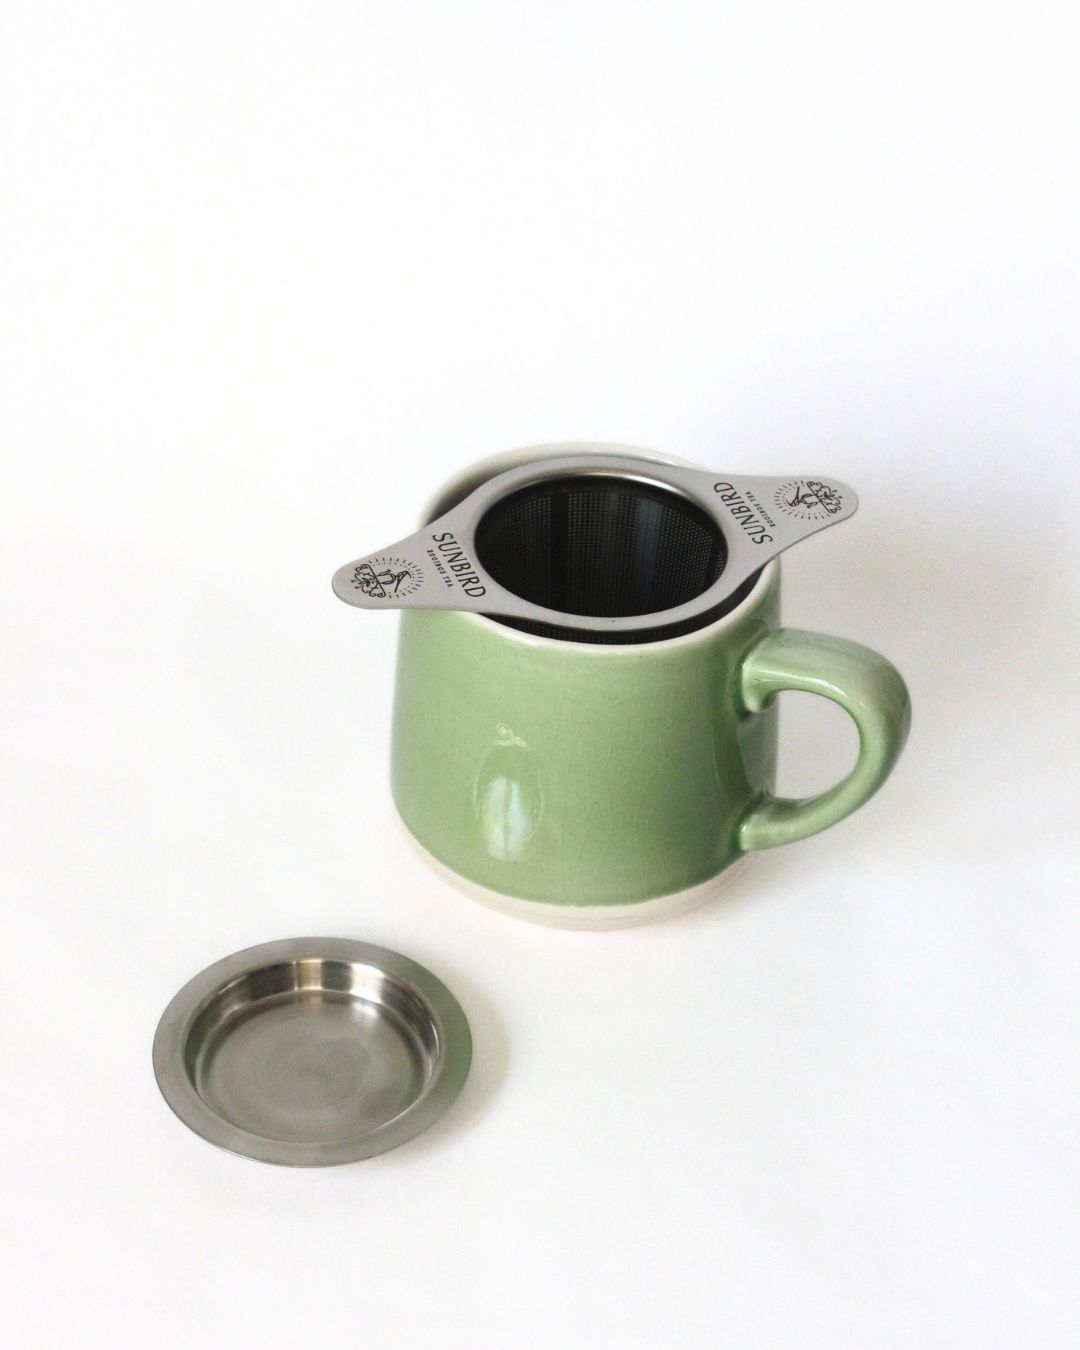 Stainless steel tea infuser with a lid